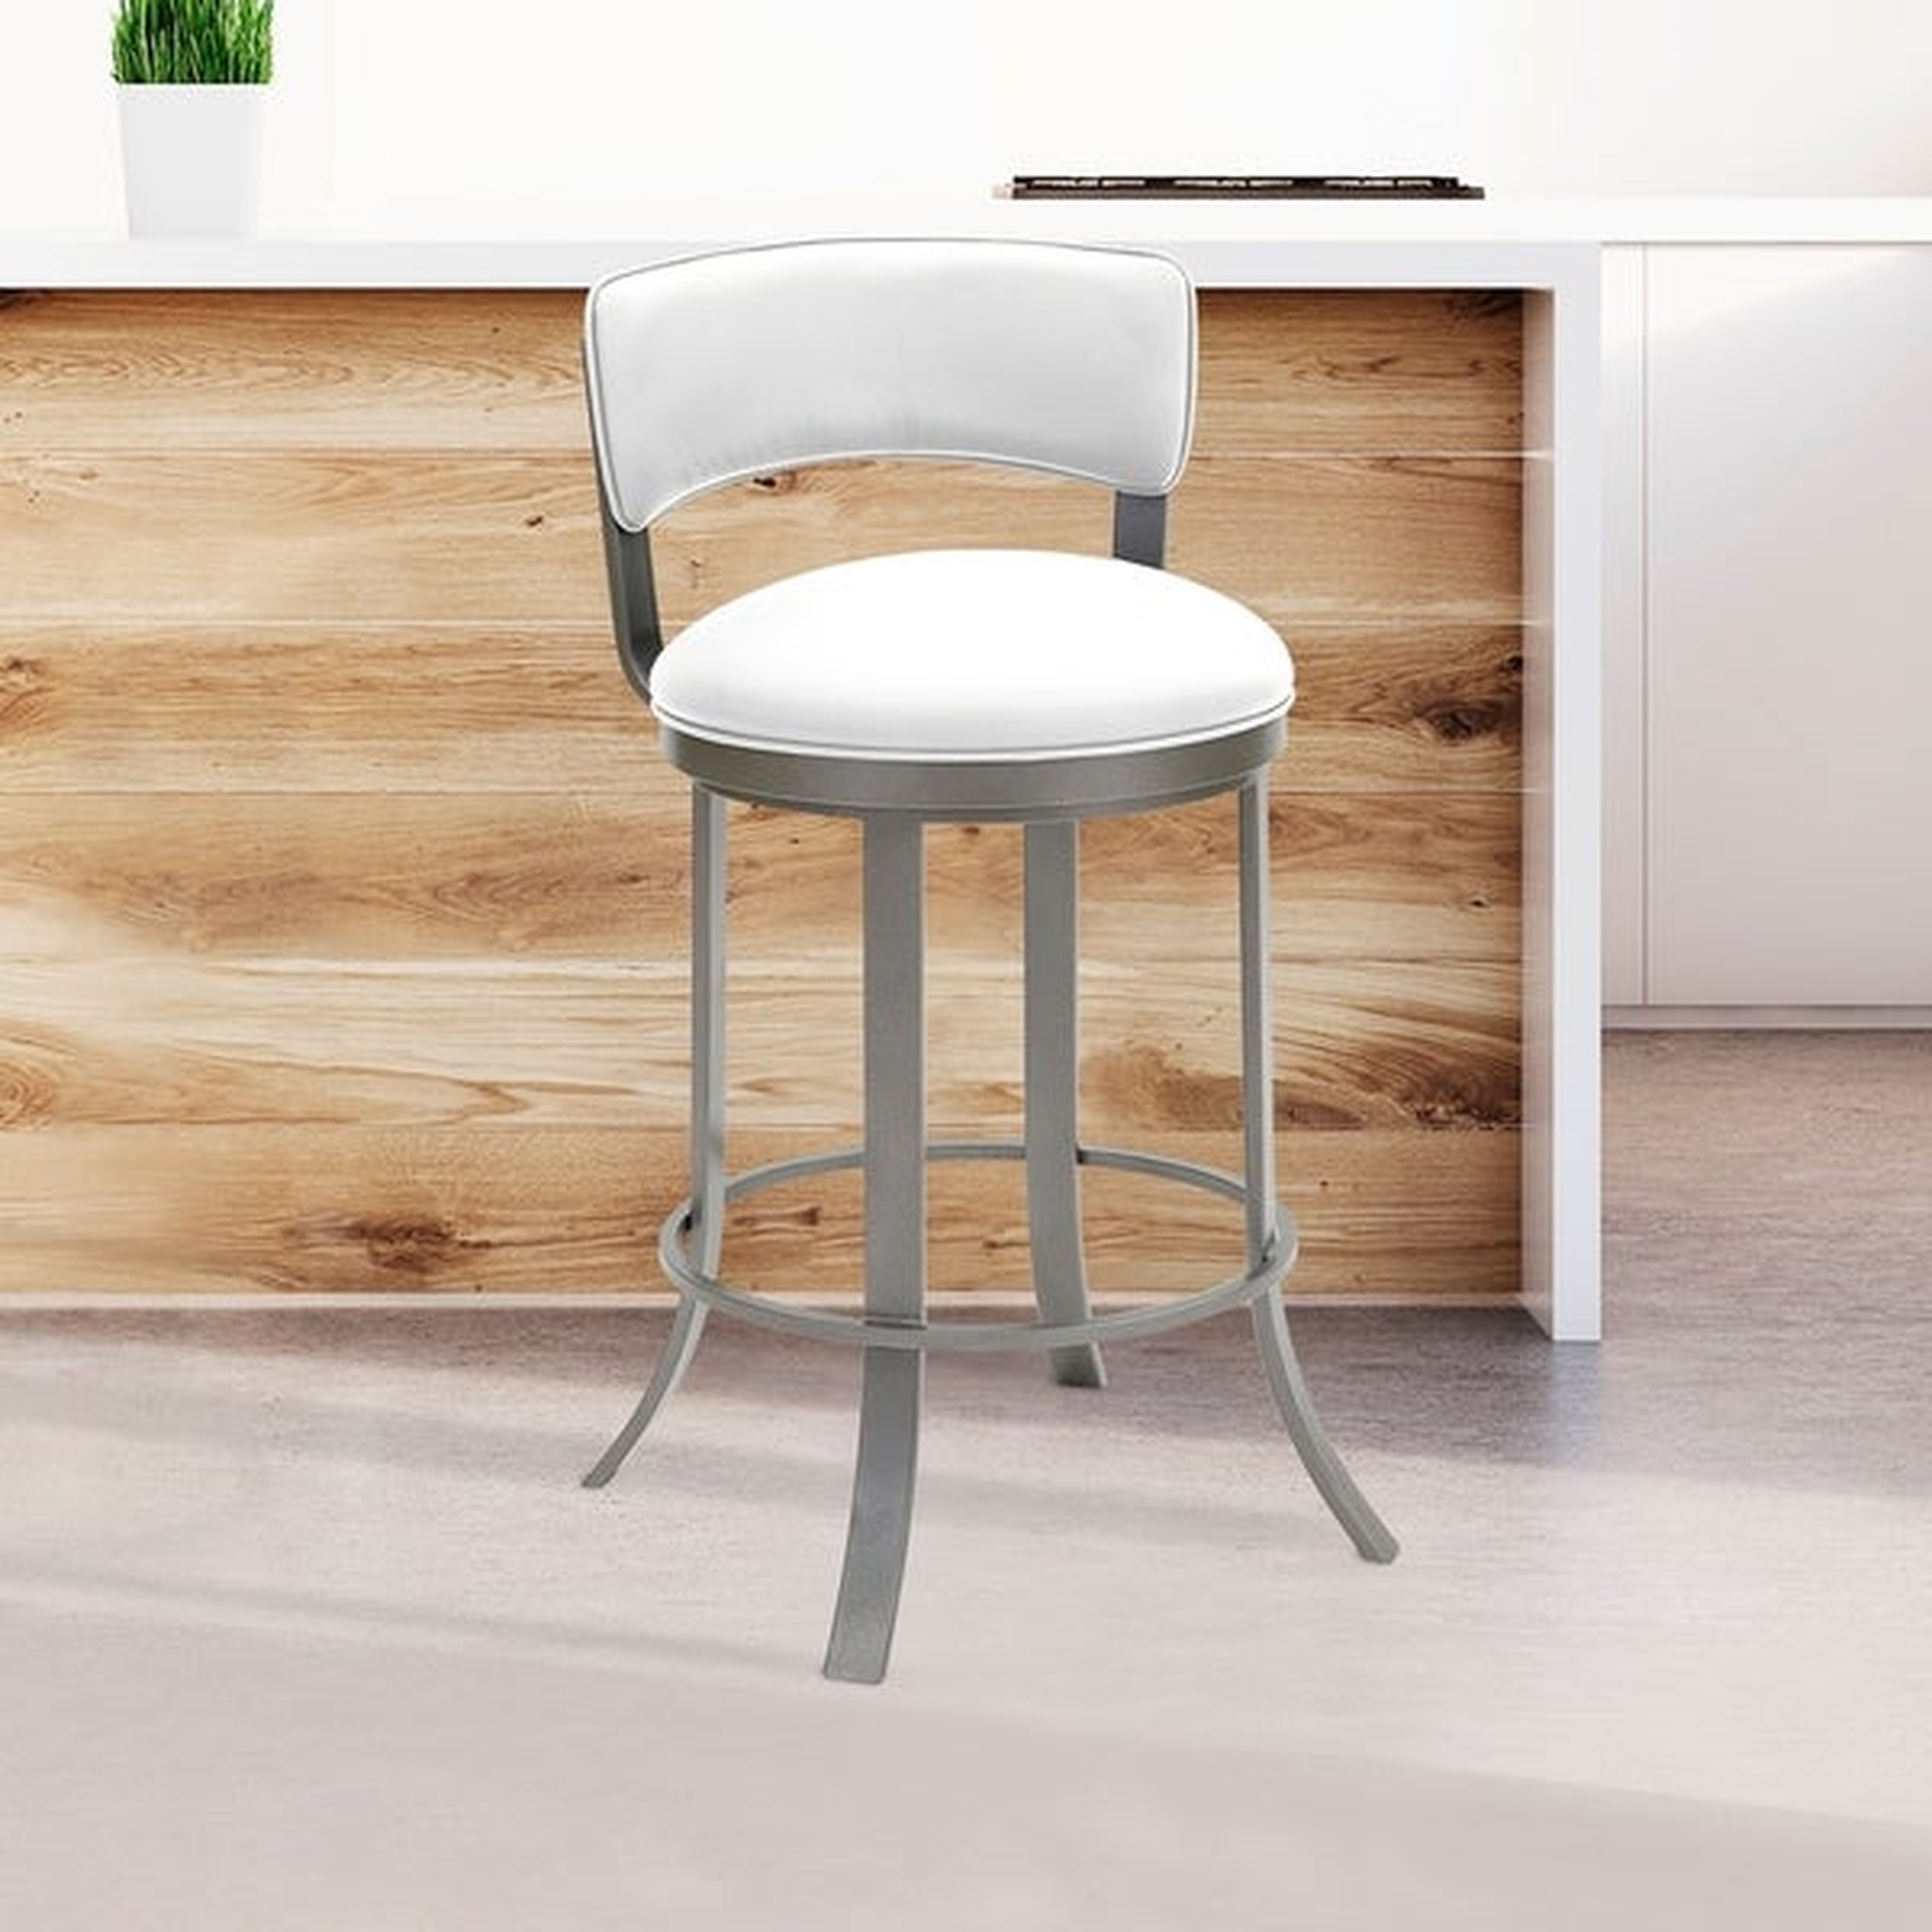 Taylor Gray Home Camilla Metal Swivel Barstool in Aspen Pure White Faux Leather and Silver Palladium Finish - Overstock